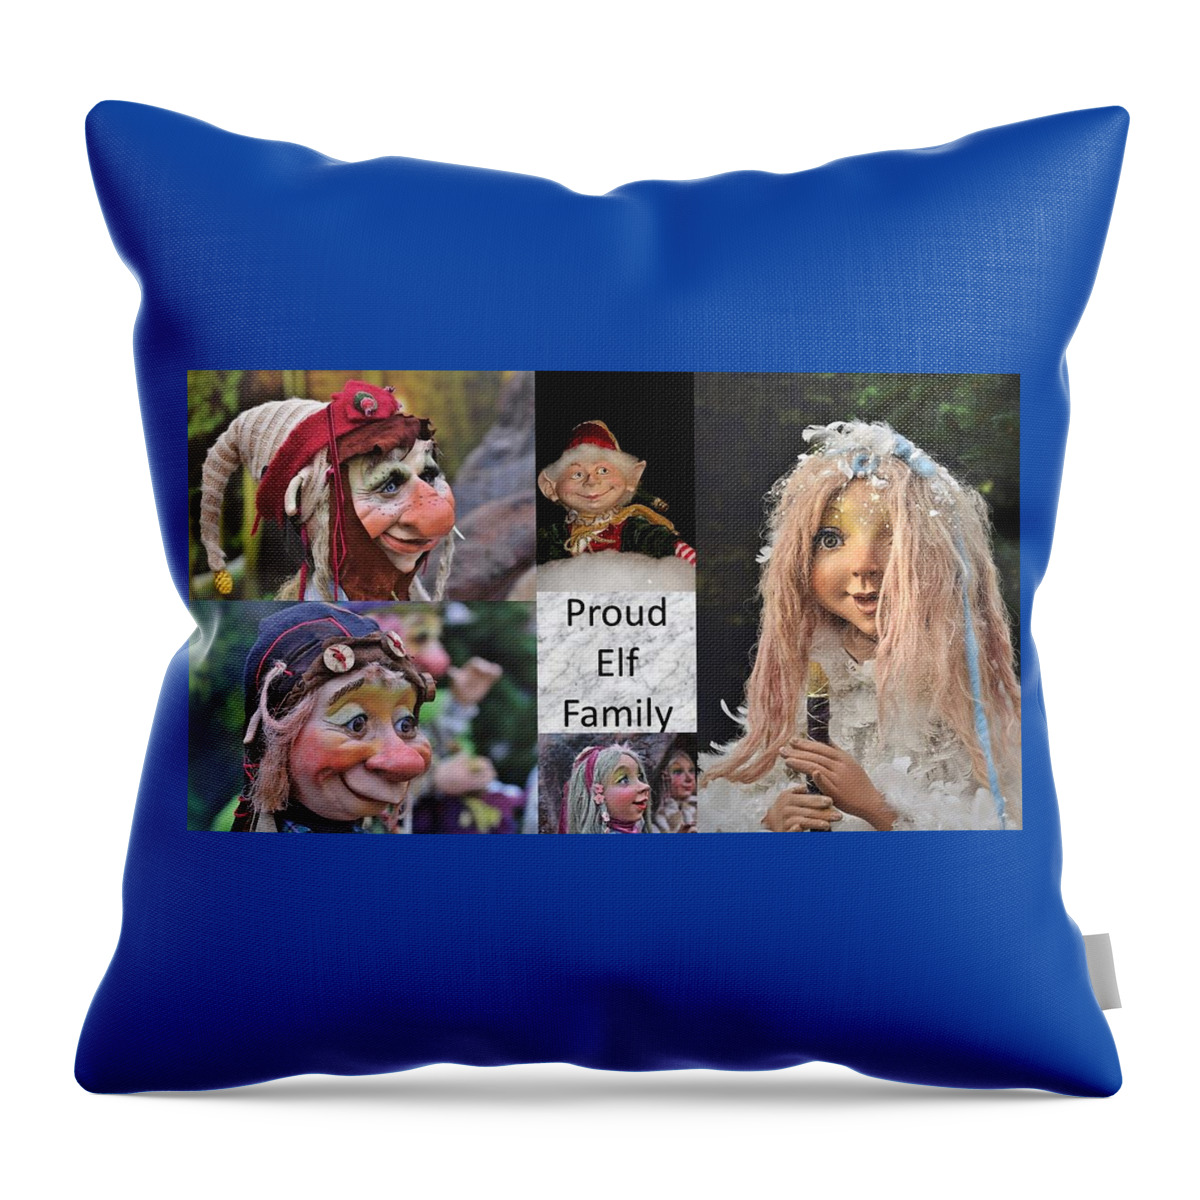 Elf Throw Pillow featuring the mixed media Proud Elf Family by Nancy Ayanna Wyatt